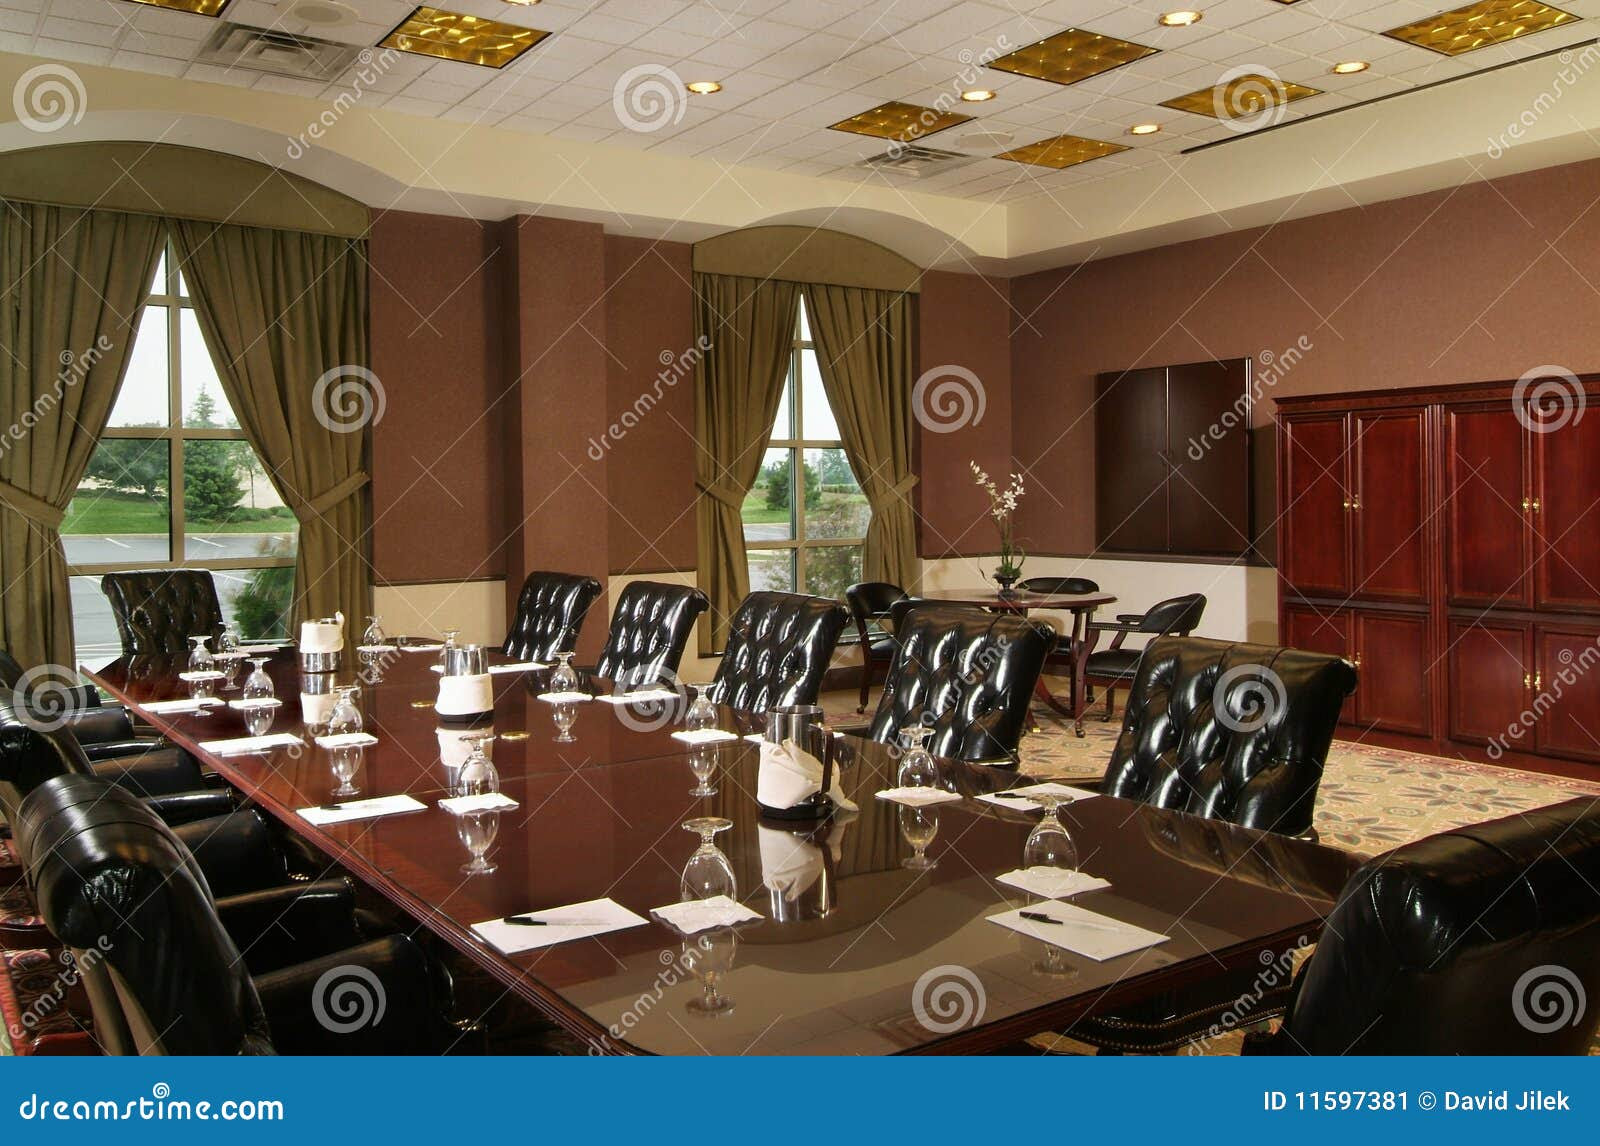 Luxury Conference Room Stock Image - Image: 11597381